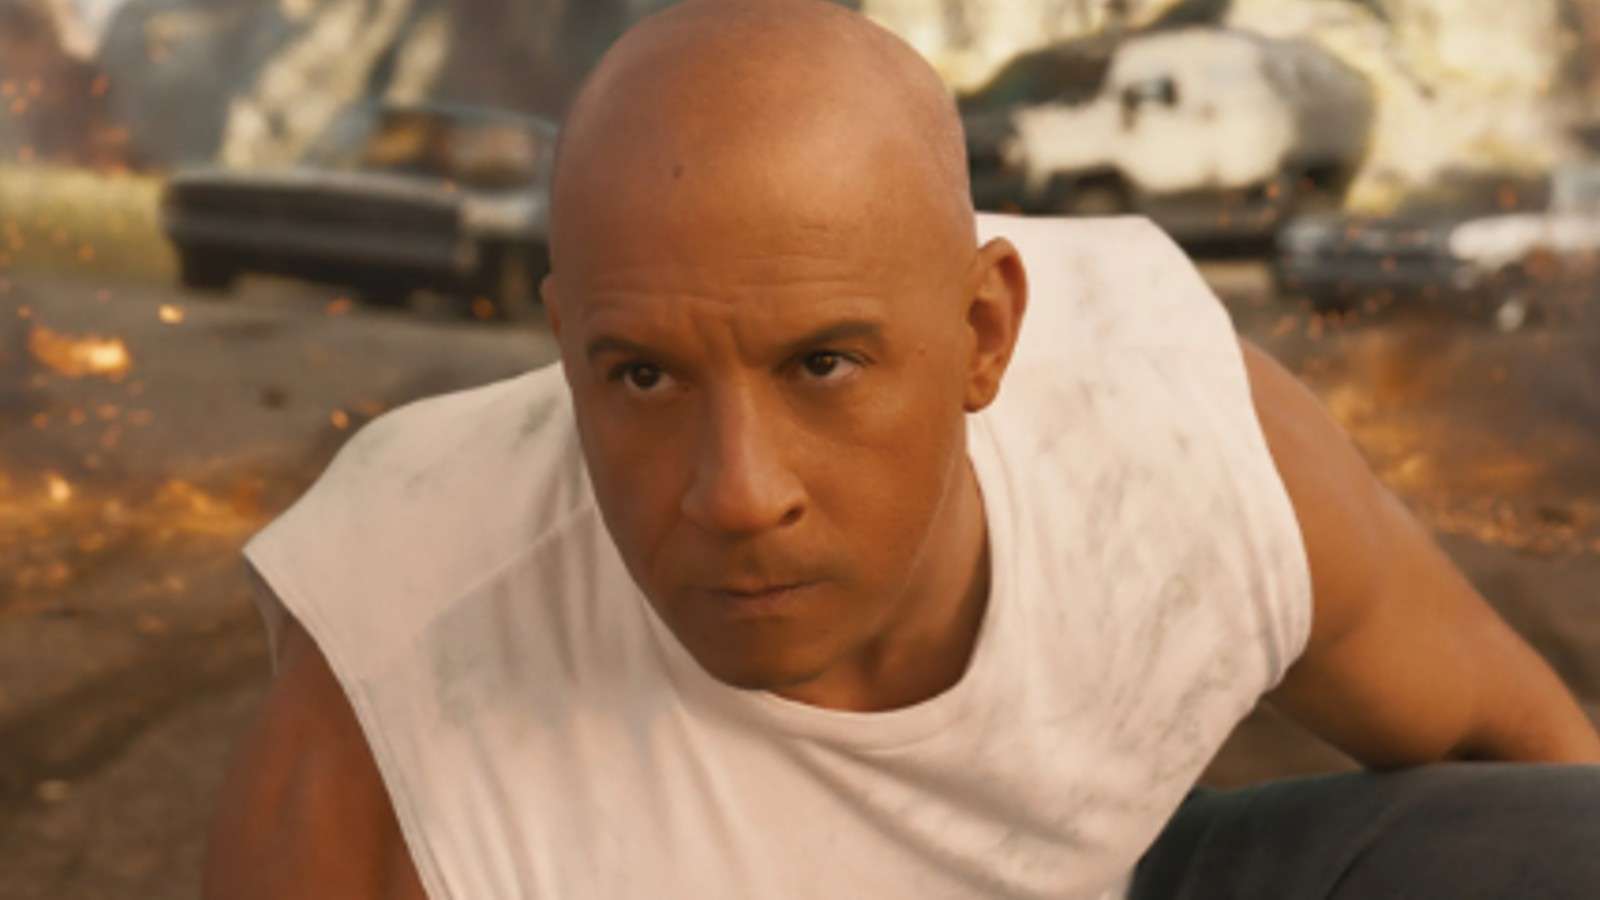 Dominic Toretto stands in front of an explosion in Fast X